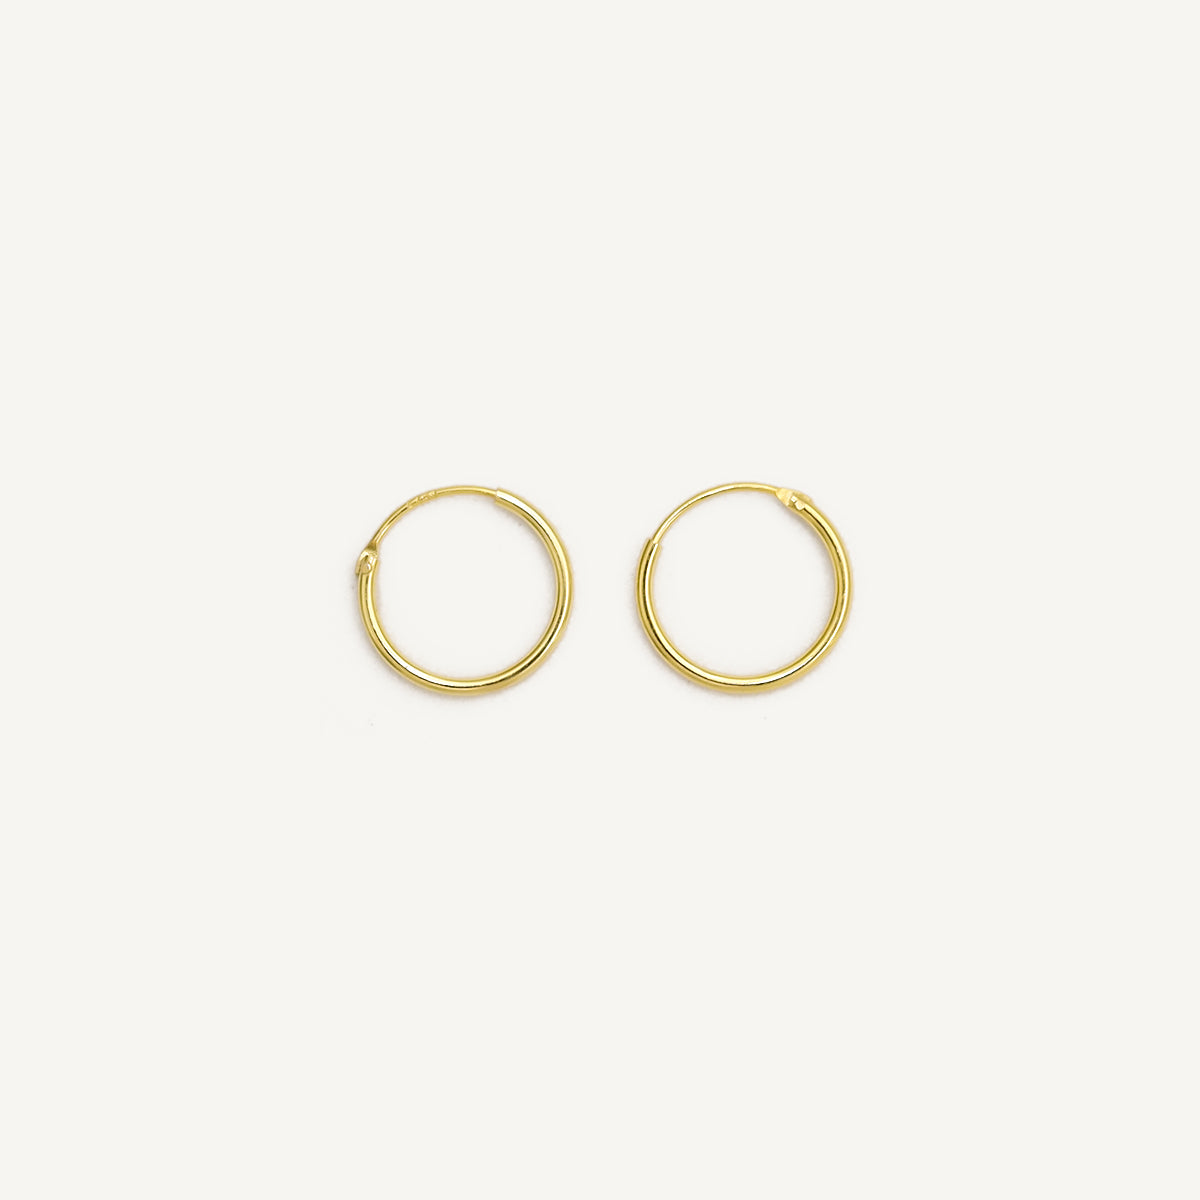 The Essential Seamless Earrings